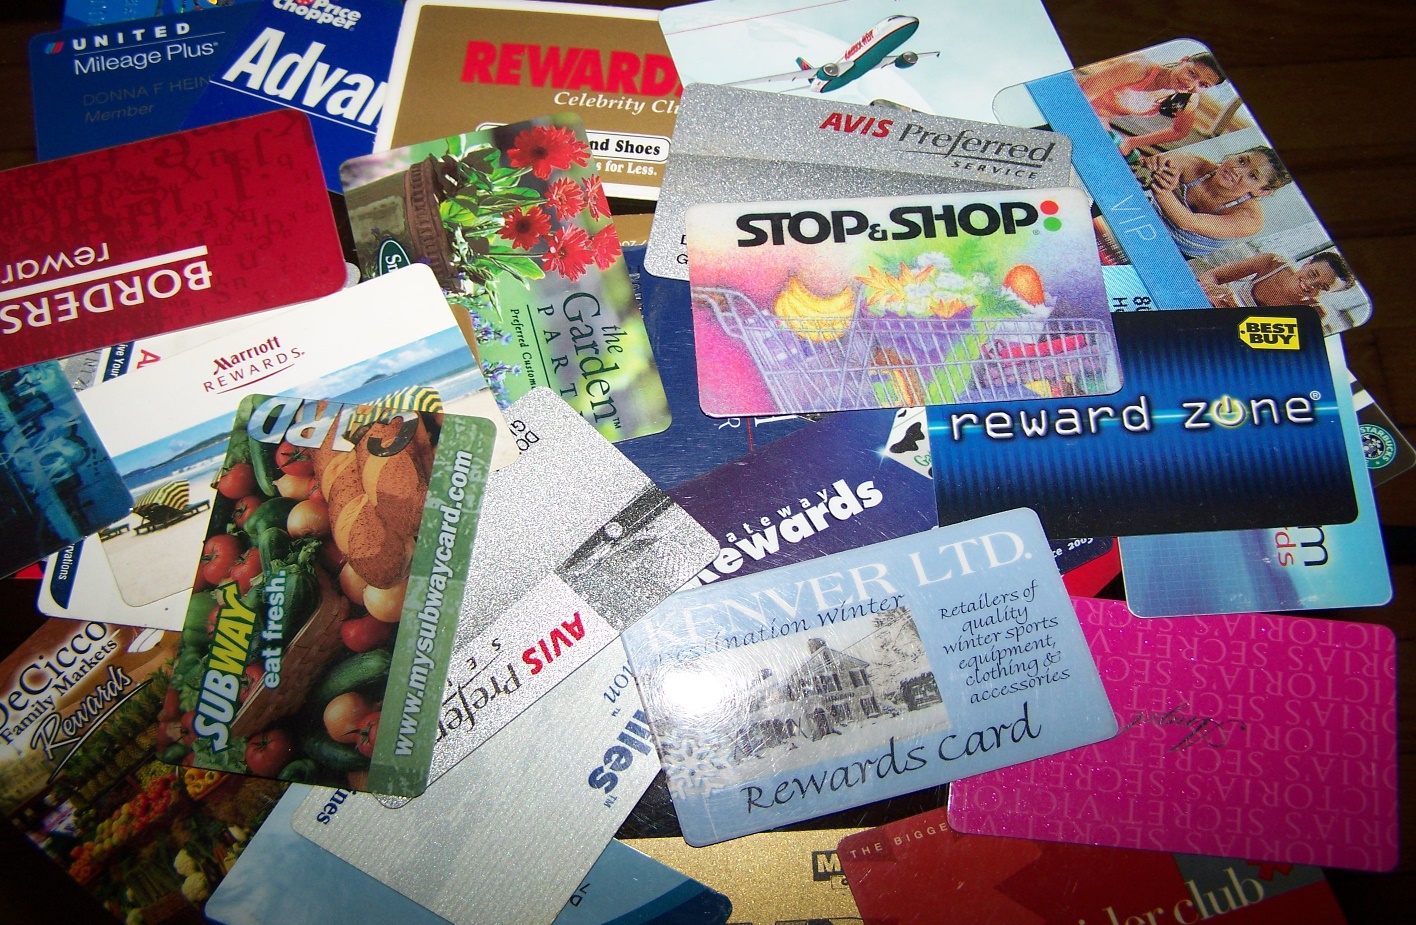 How to Promote Customer Loyalty Program with Amazing Content